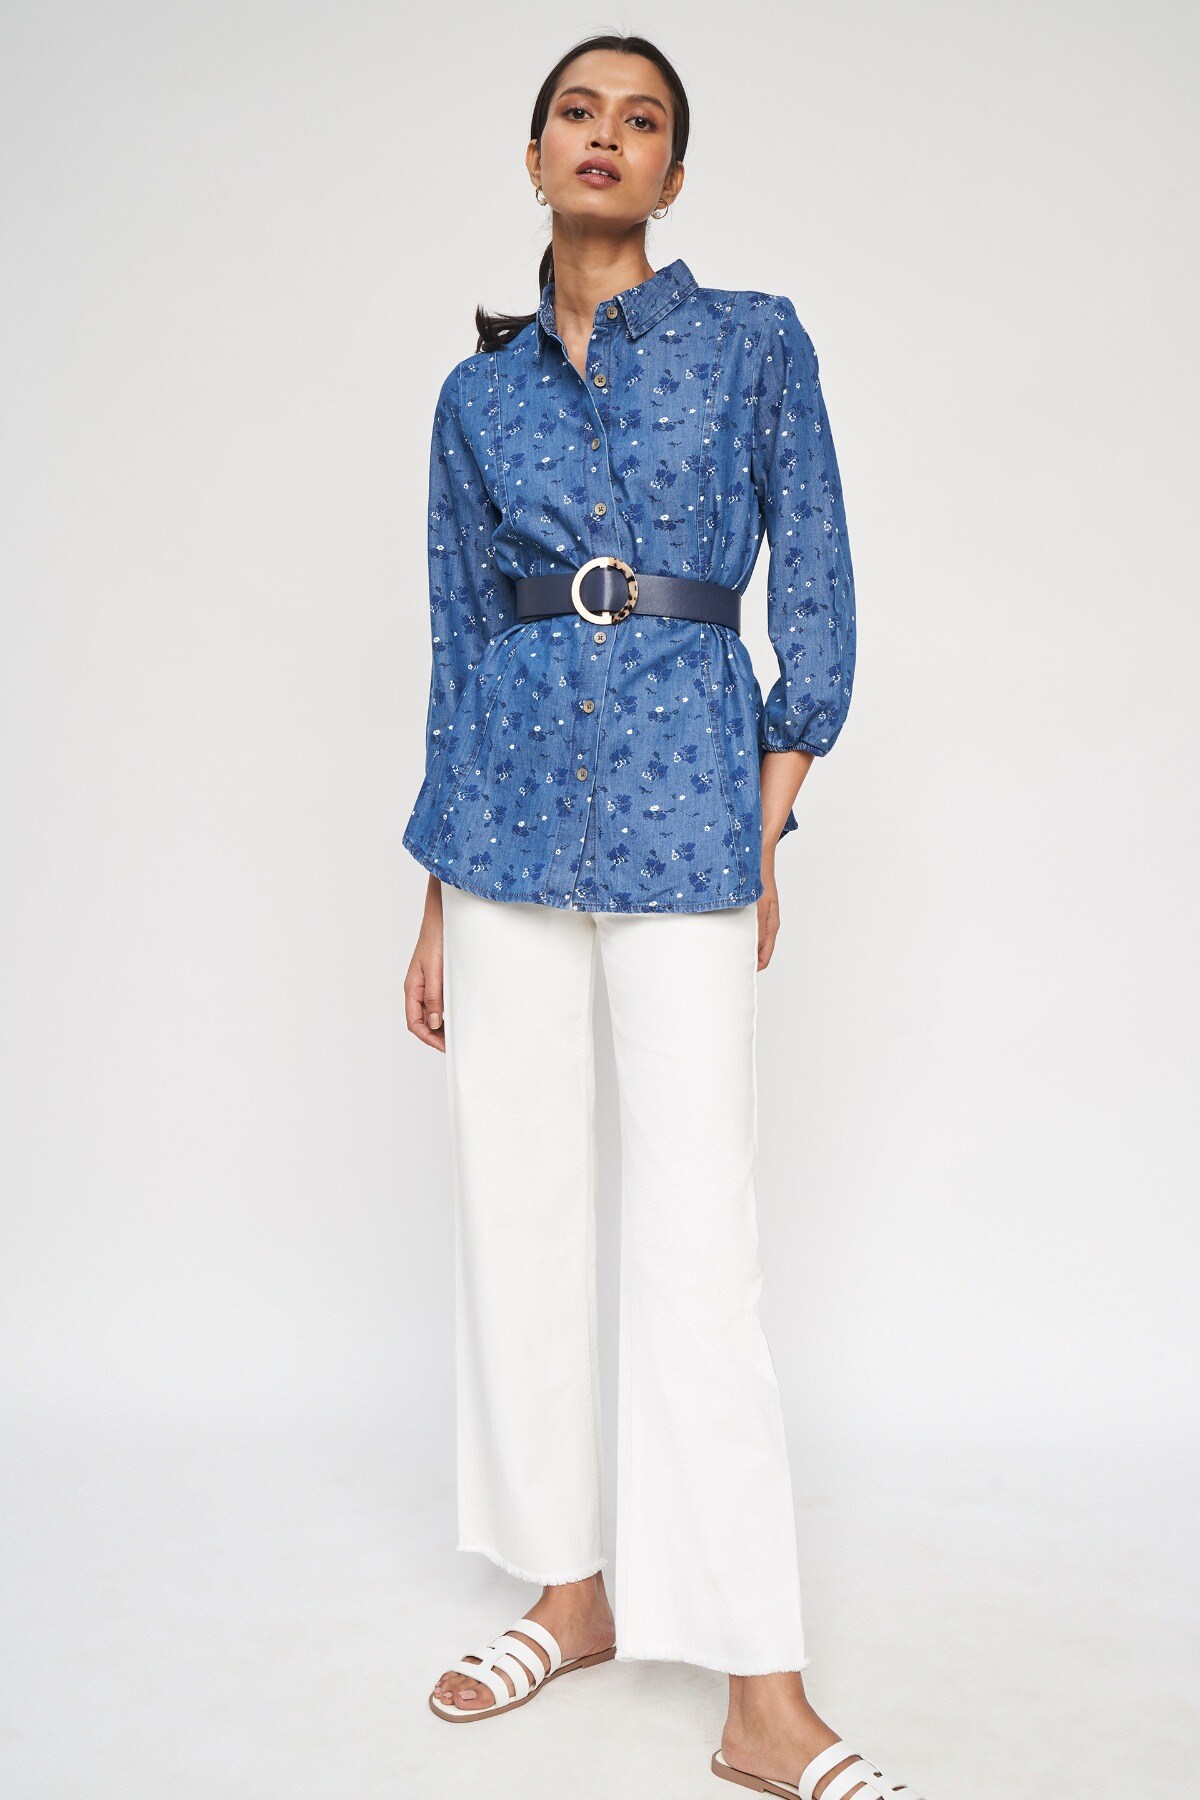 4 - Blue Floral Printed Fit And Flare Top, image 4